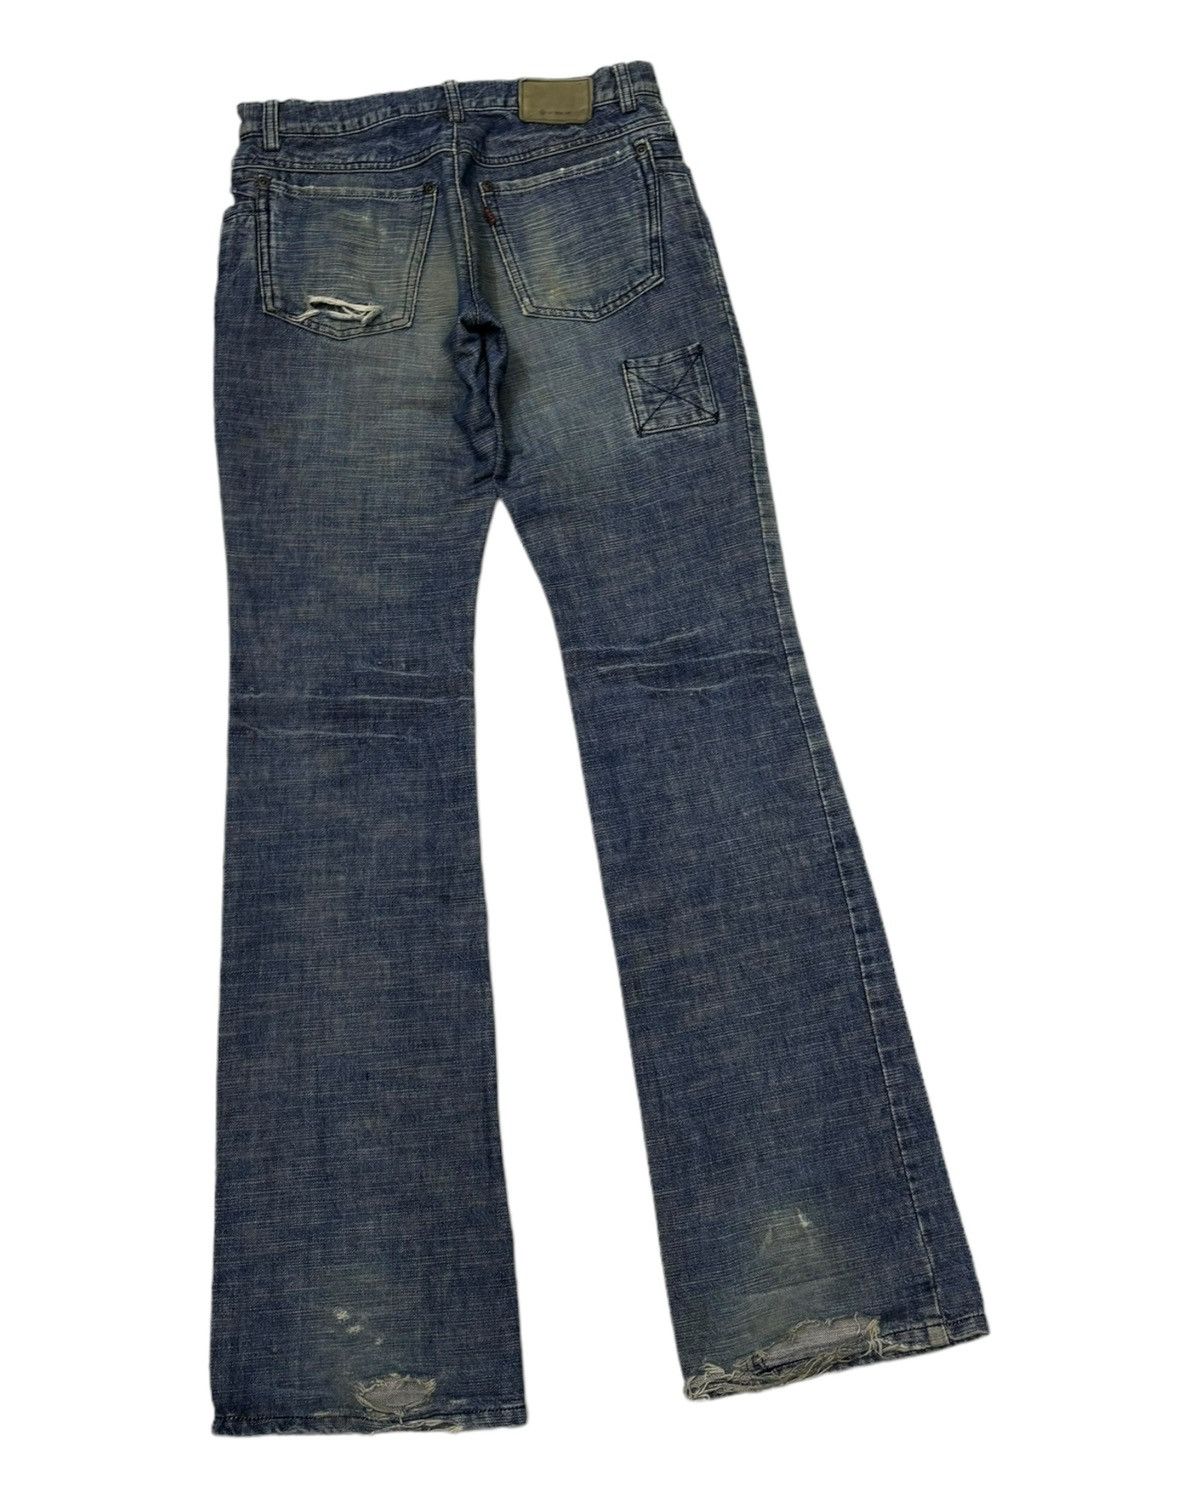 Archival Clothing - 🔥ARCHIVE L7 REAL HIP JAPANESE FLARED DENIM BOOTCUT JEANS - 5